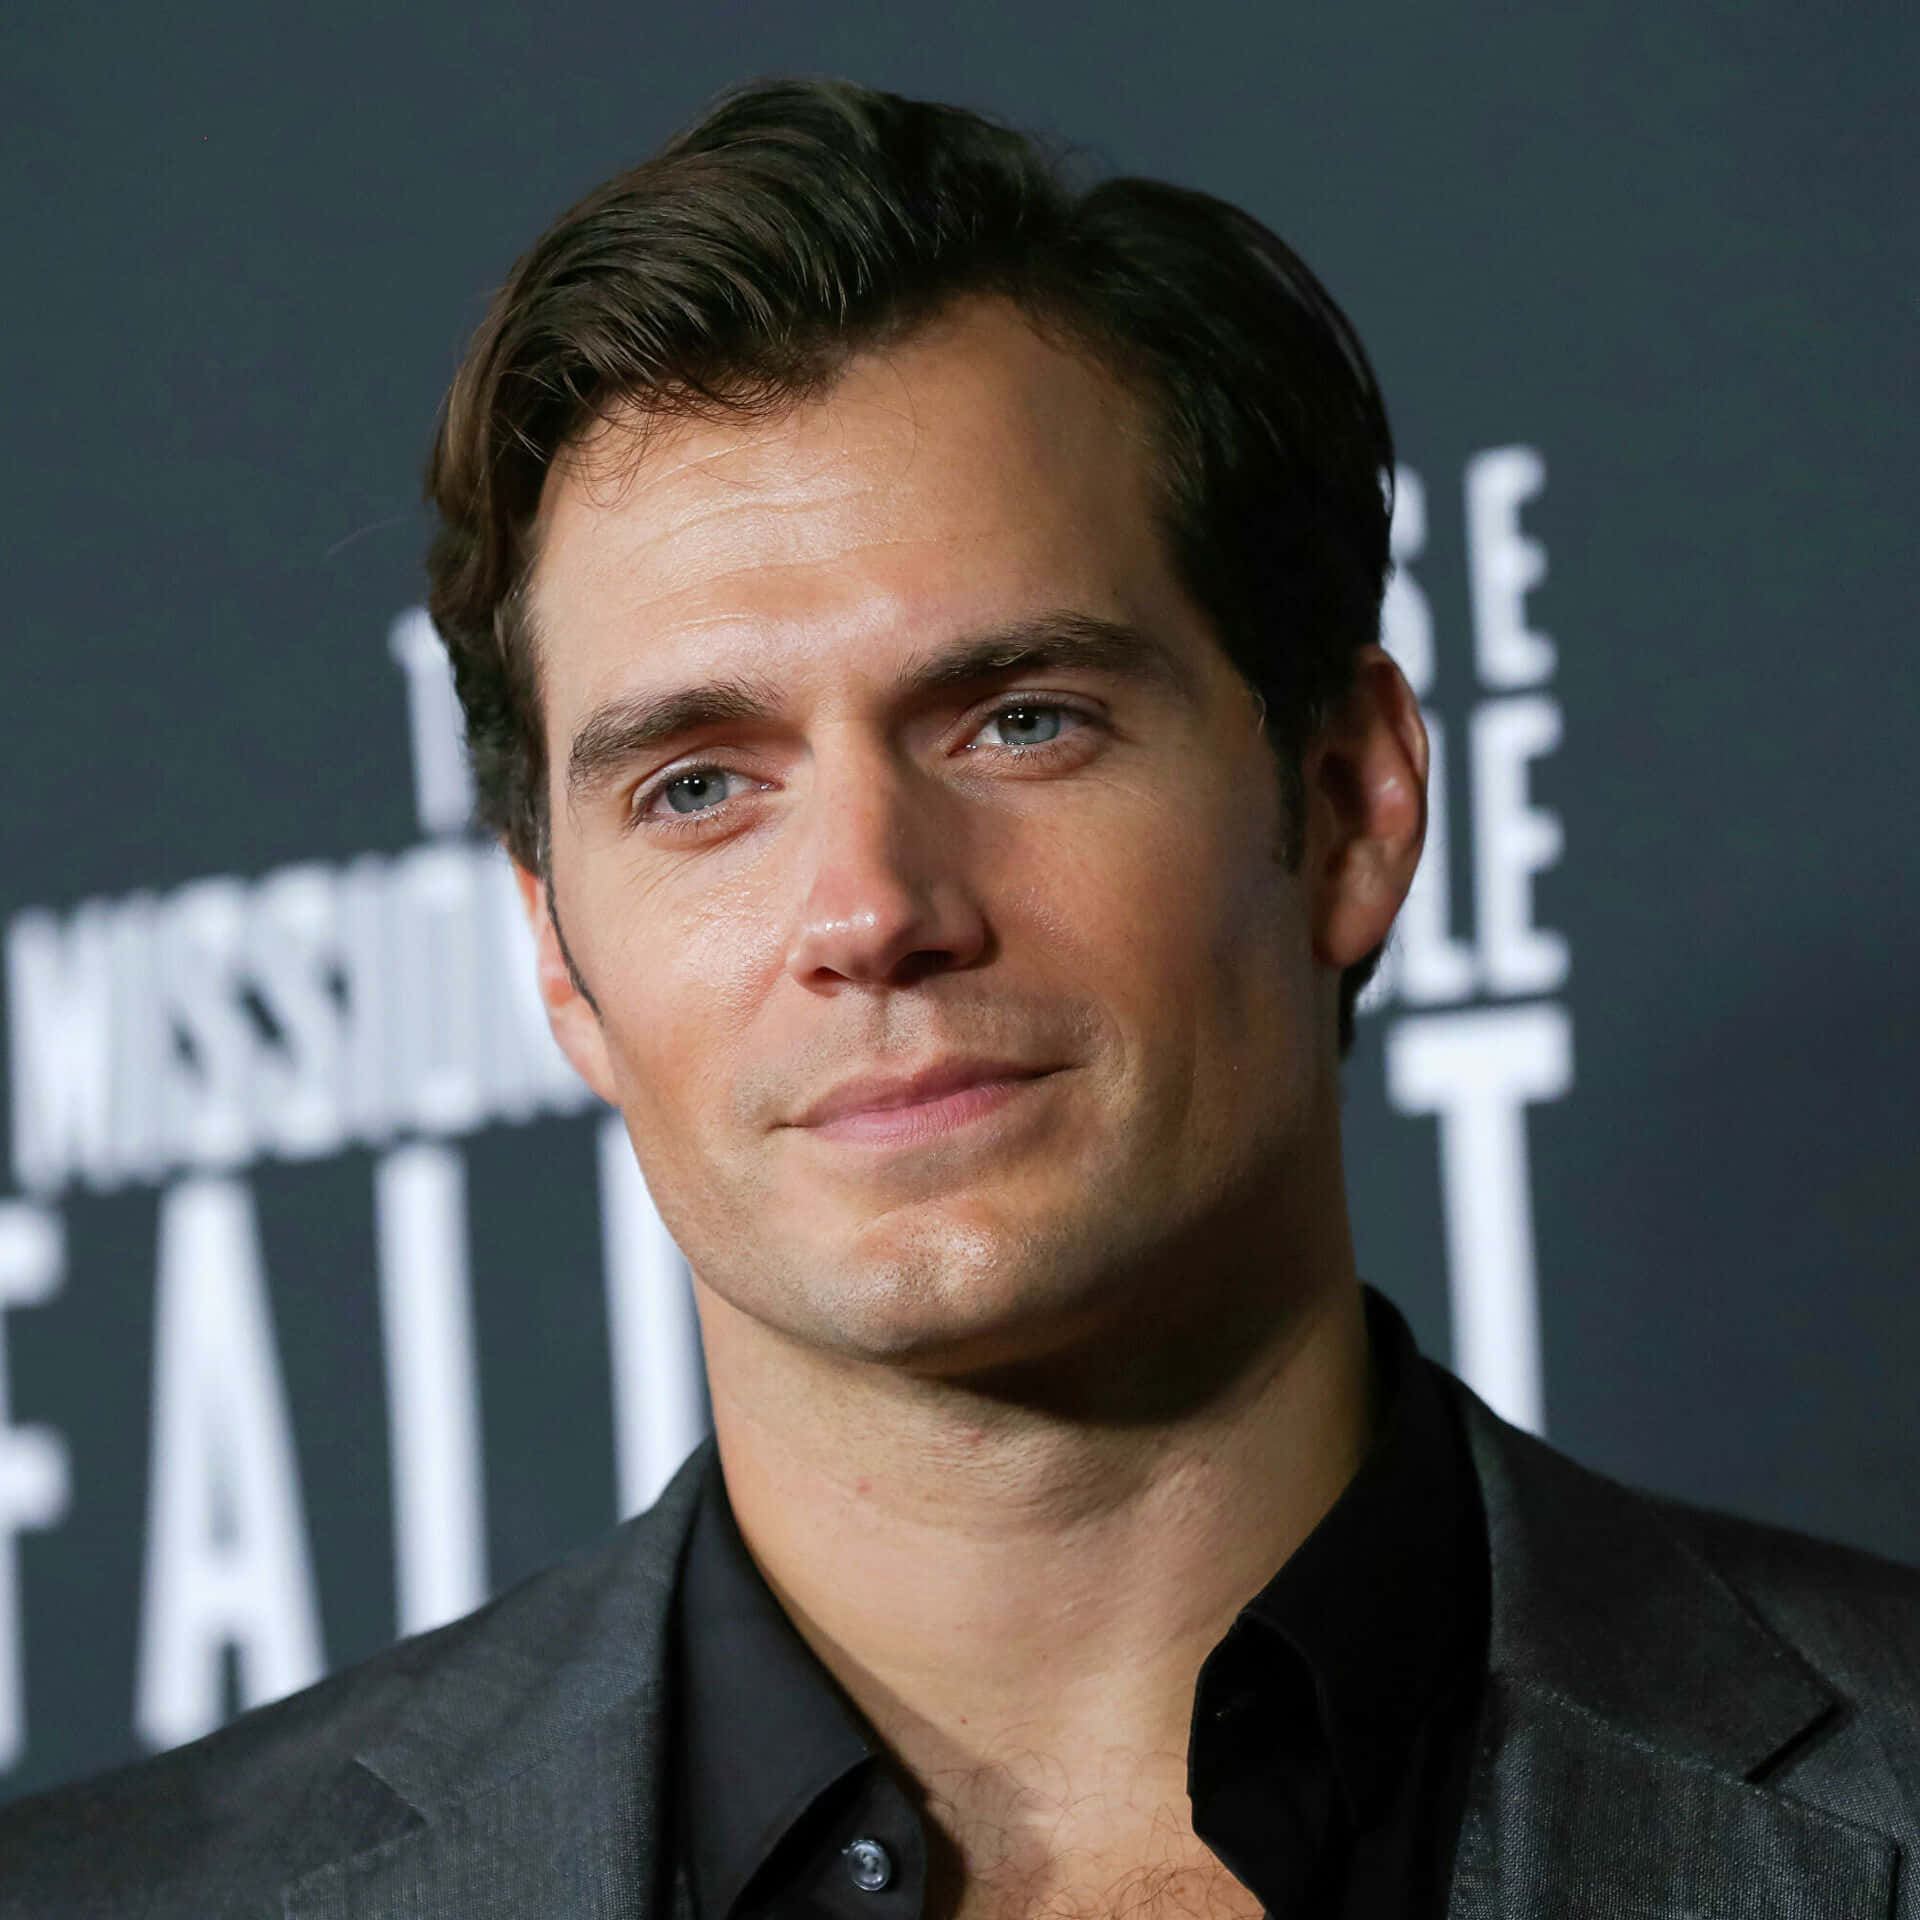 Charismatic Henry Cavill at glamorous red carpet event. Wallpaper